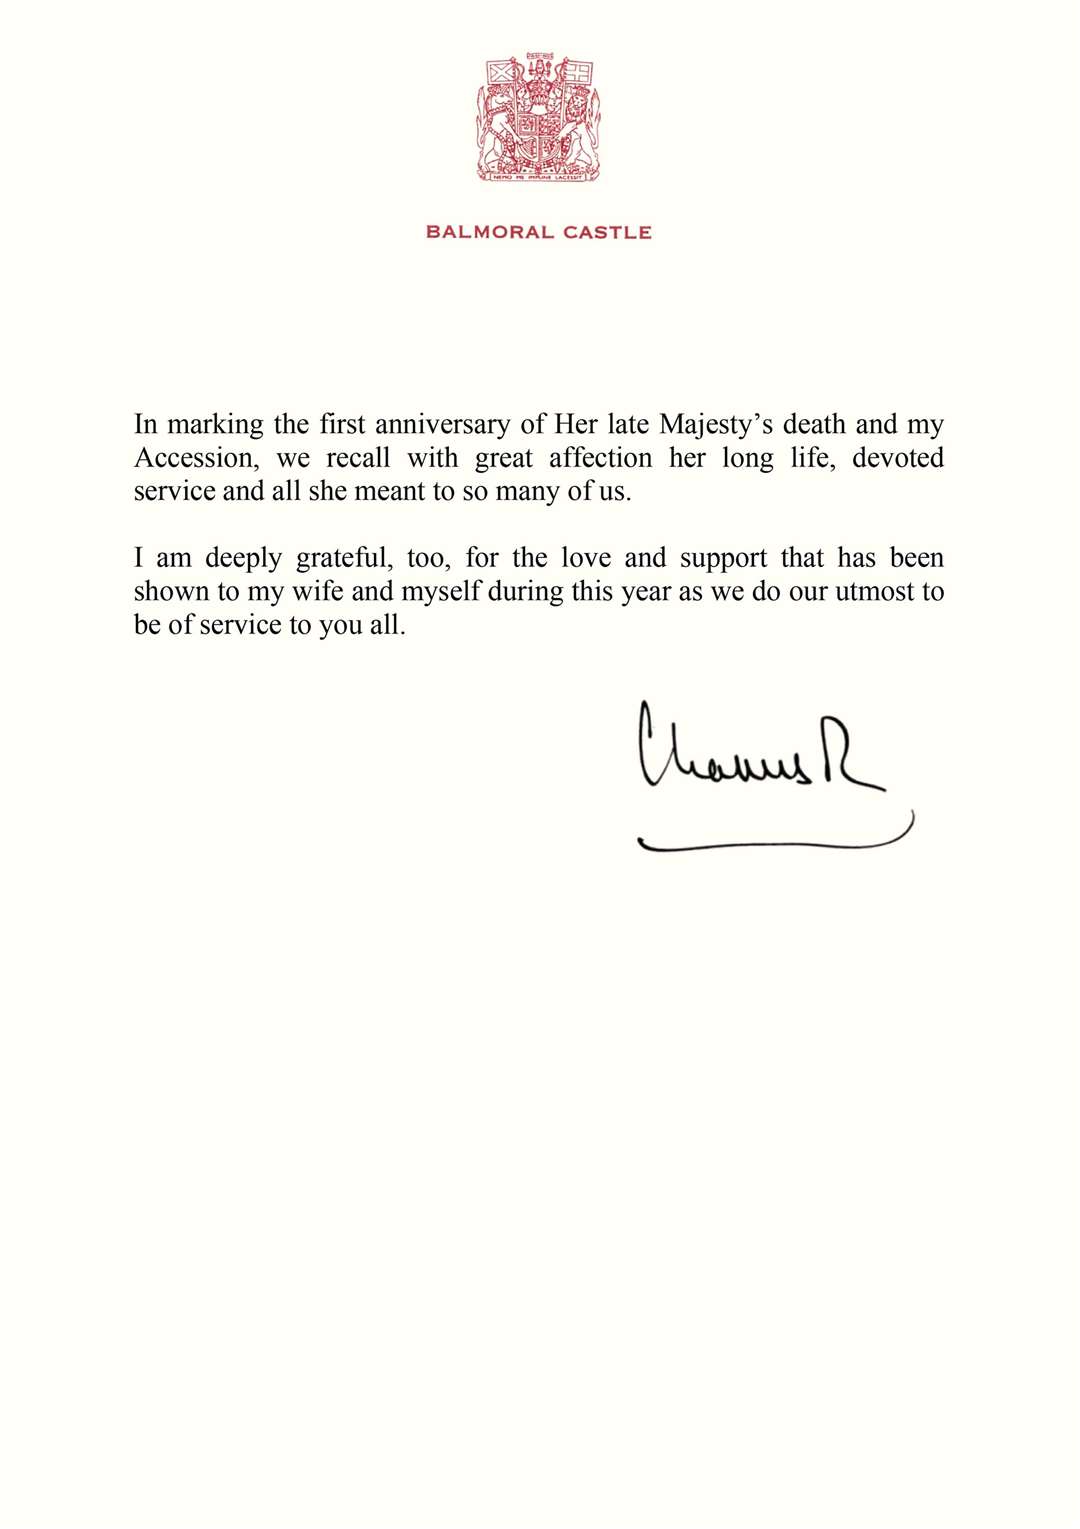 The King’s message on his accession day (His Majesty King Charles III 2023/PA)